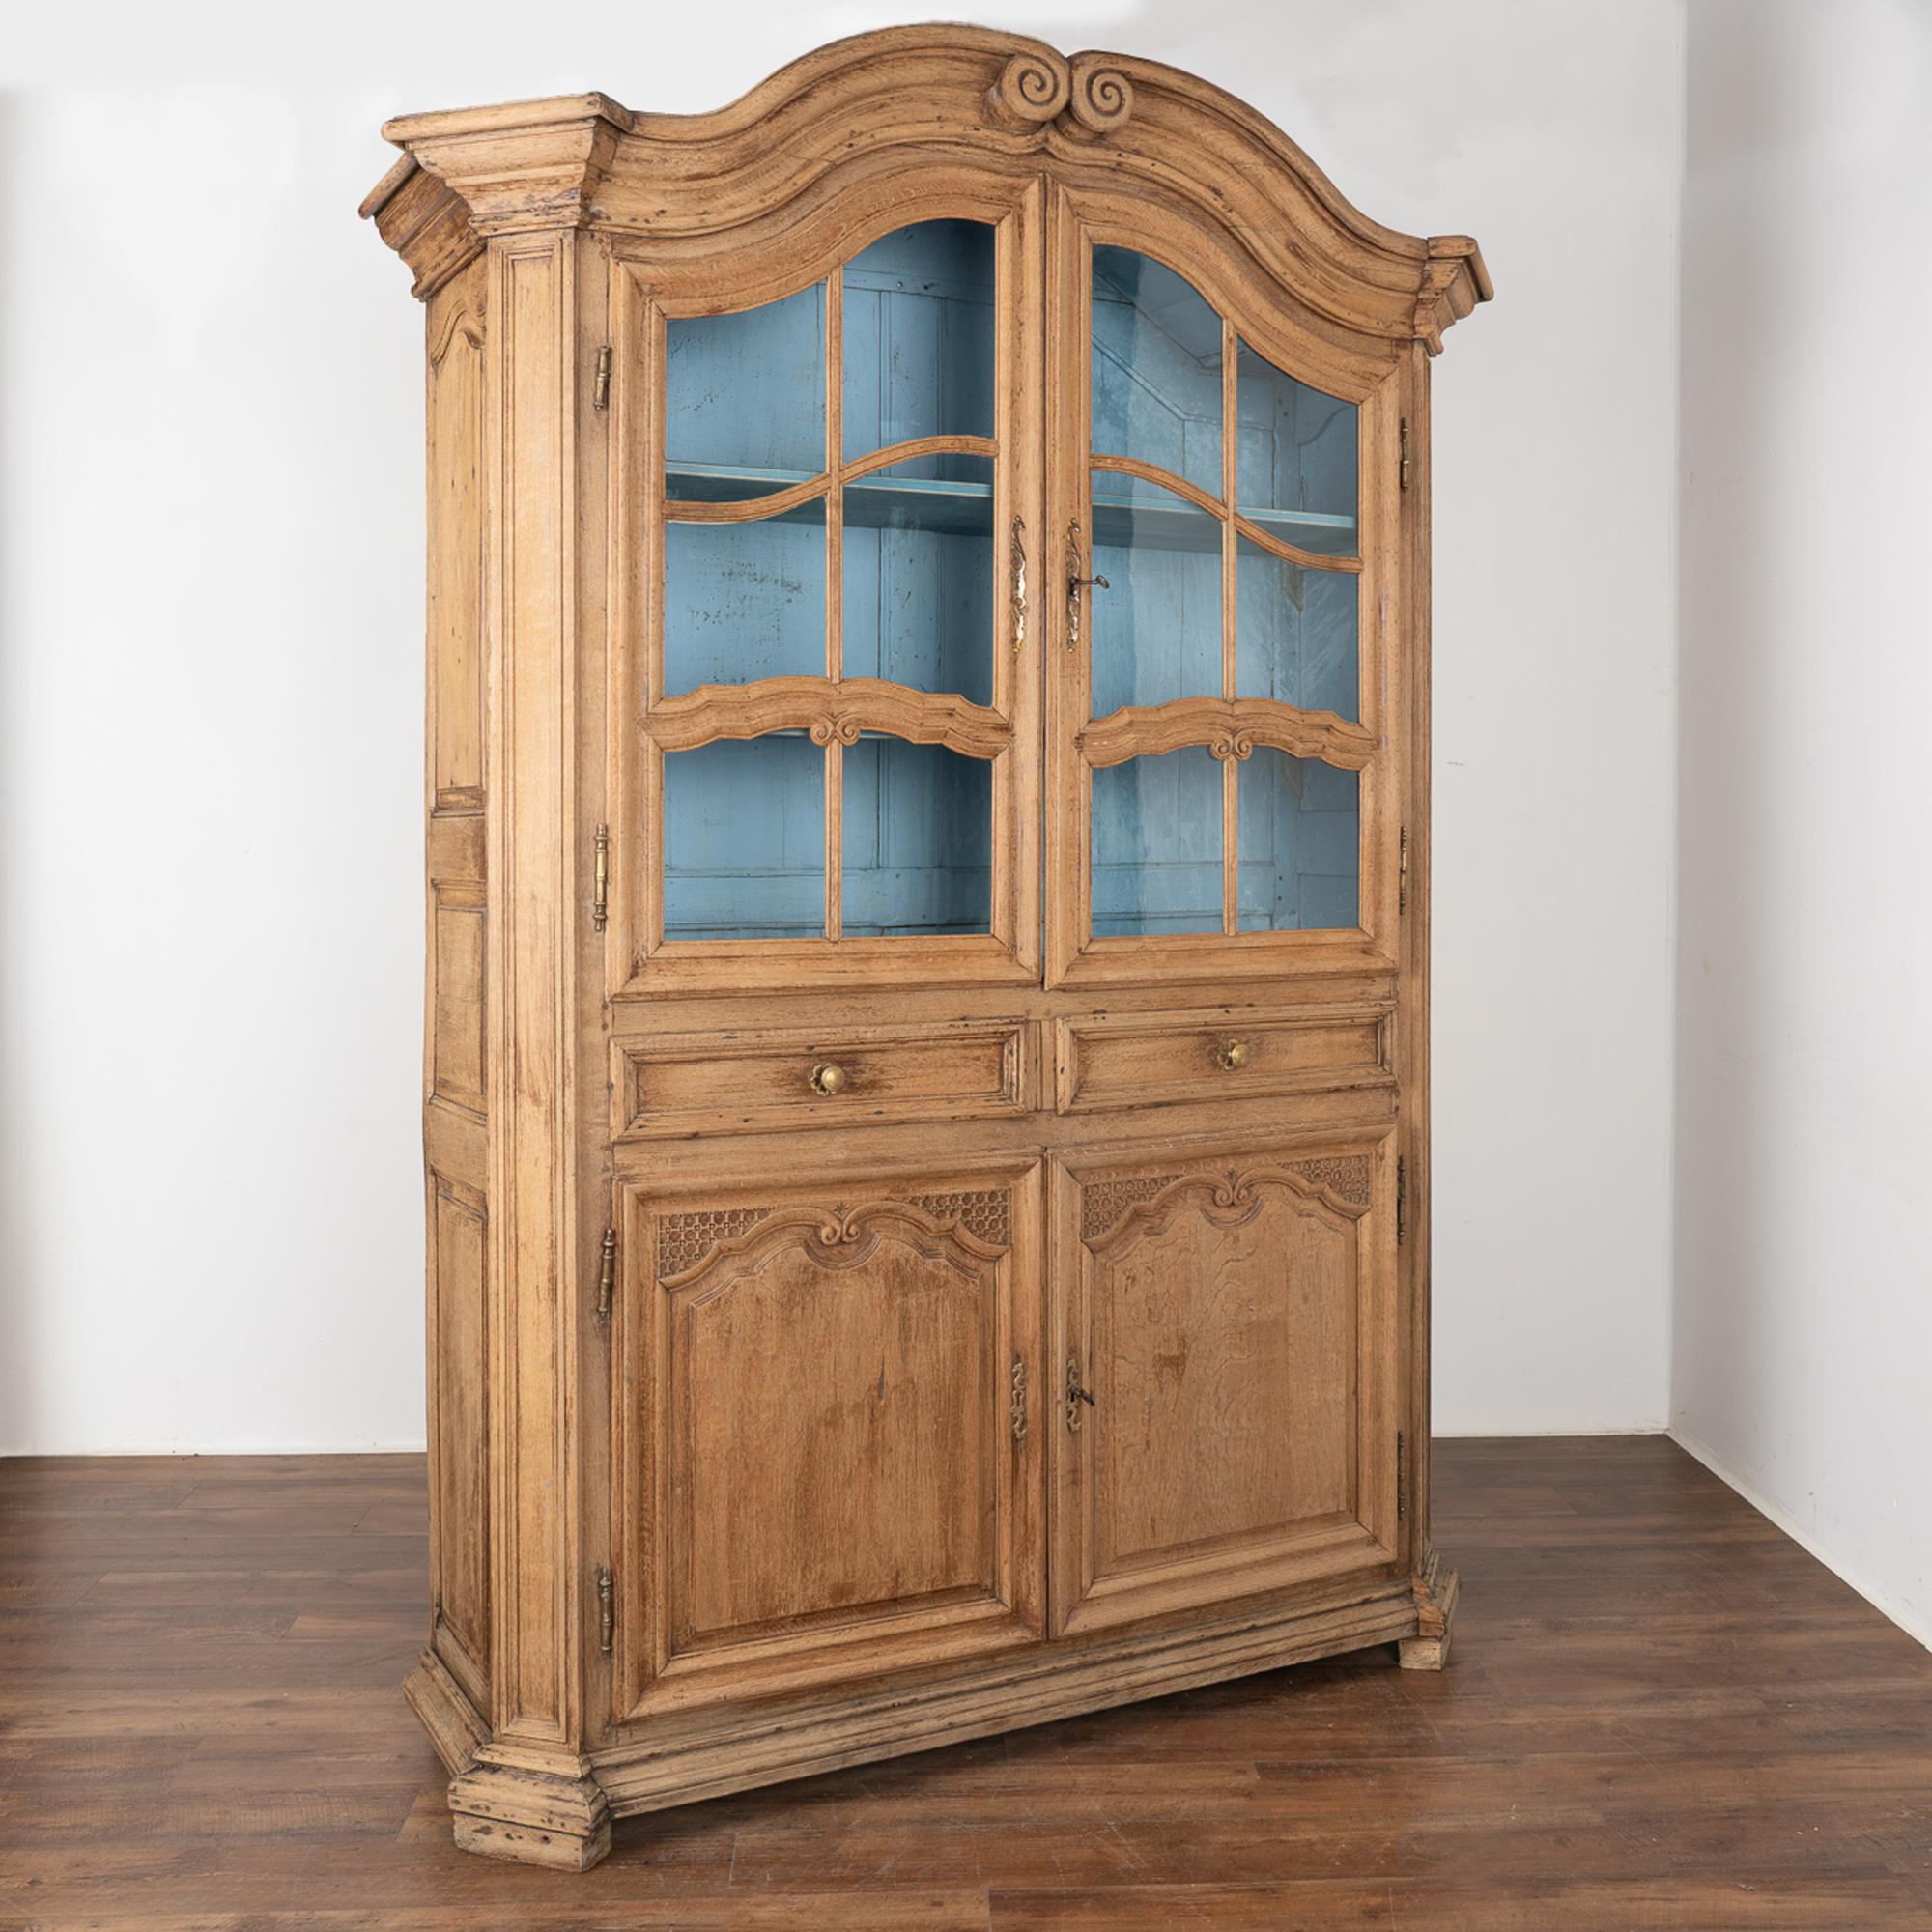 The traditional scrolled and arched crown is captivating in this French vitrine. The oak has been bleached, giving it a fresh look for today's modern home while bringing in the charm of French country craftsmanship.
Carved, scrolled accents bring